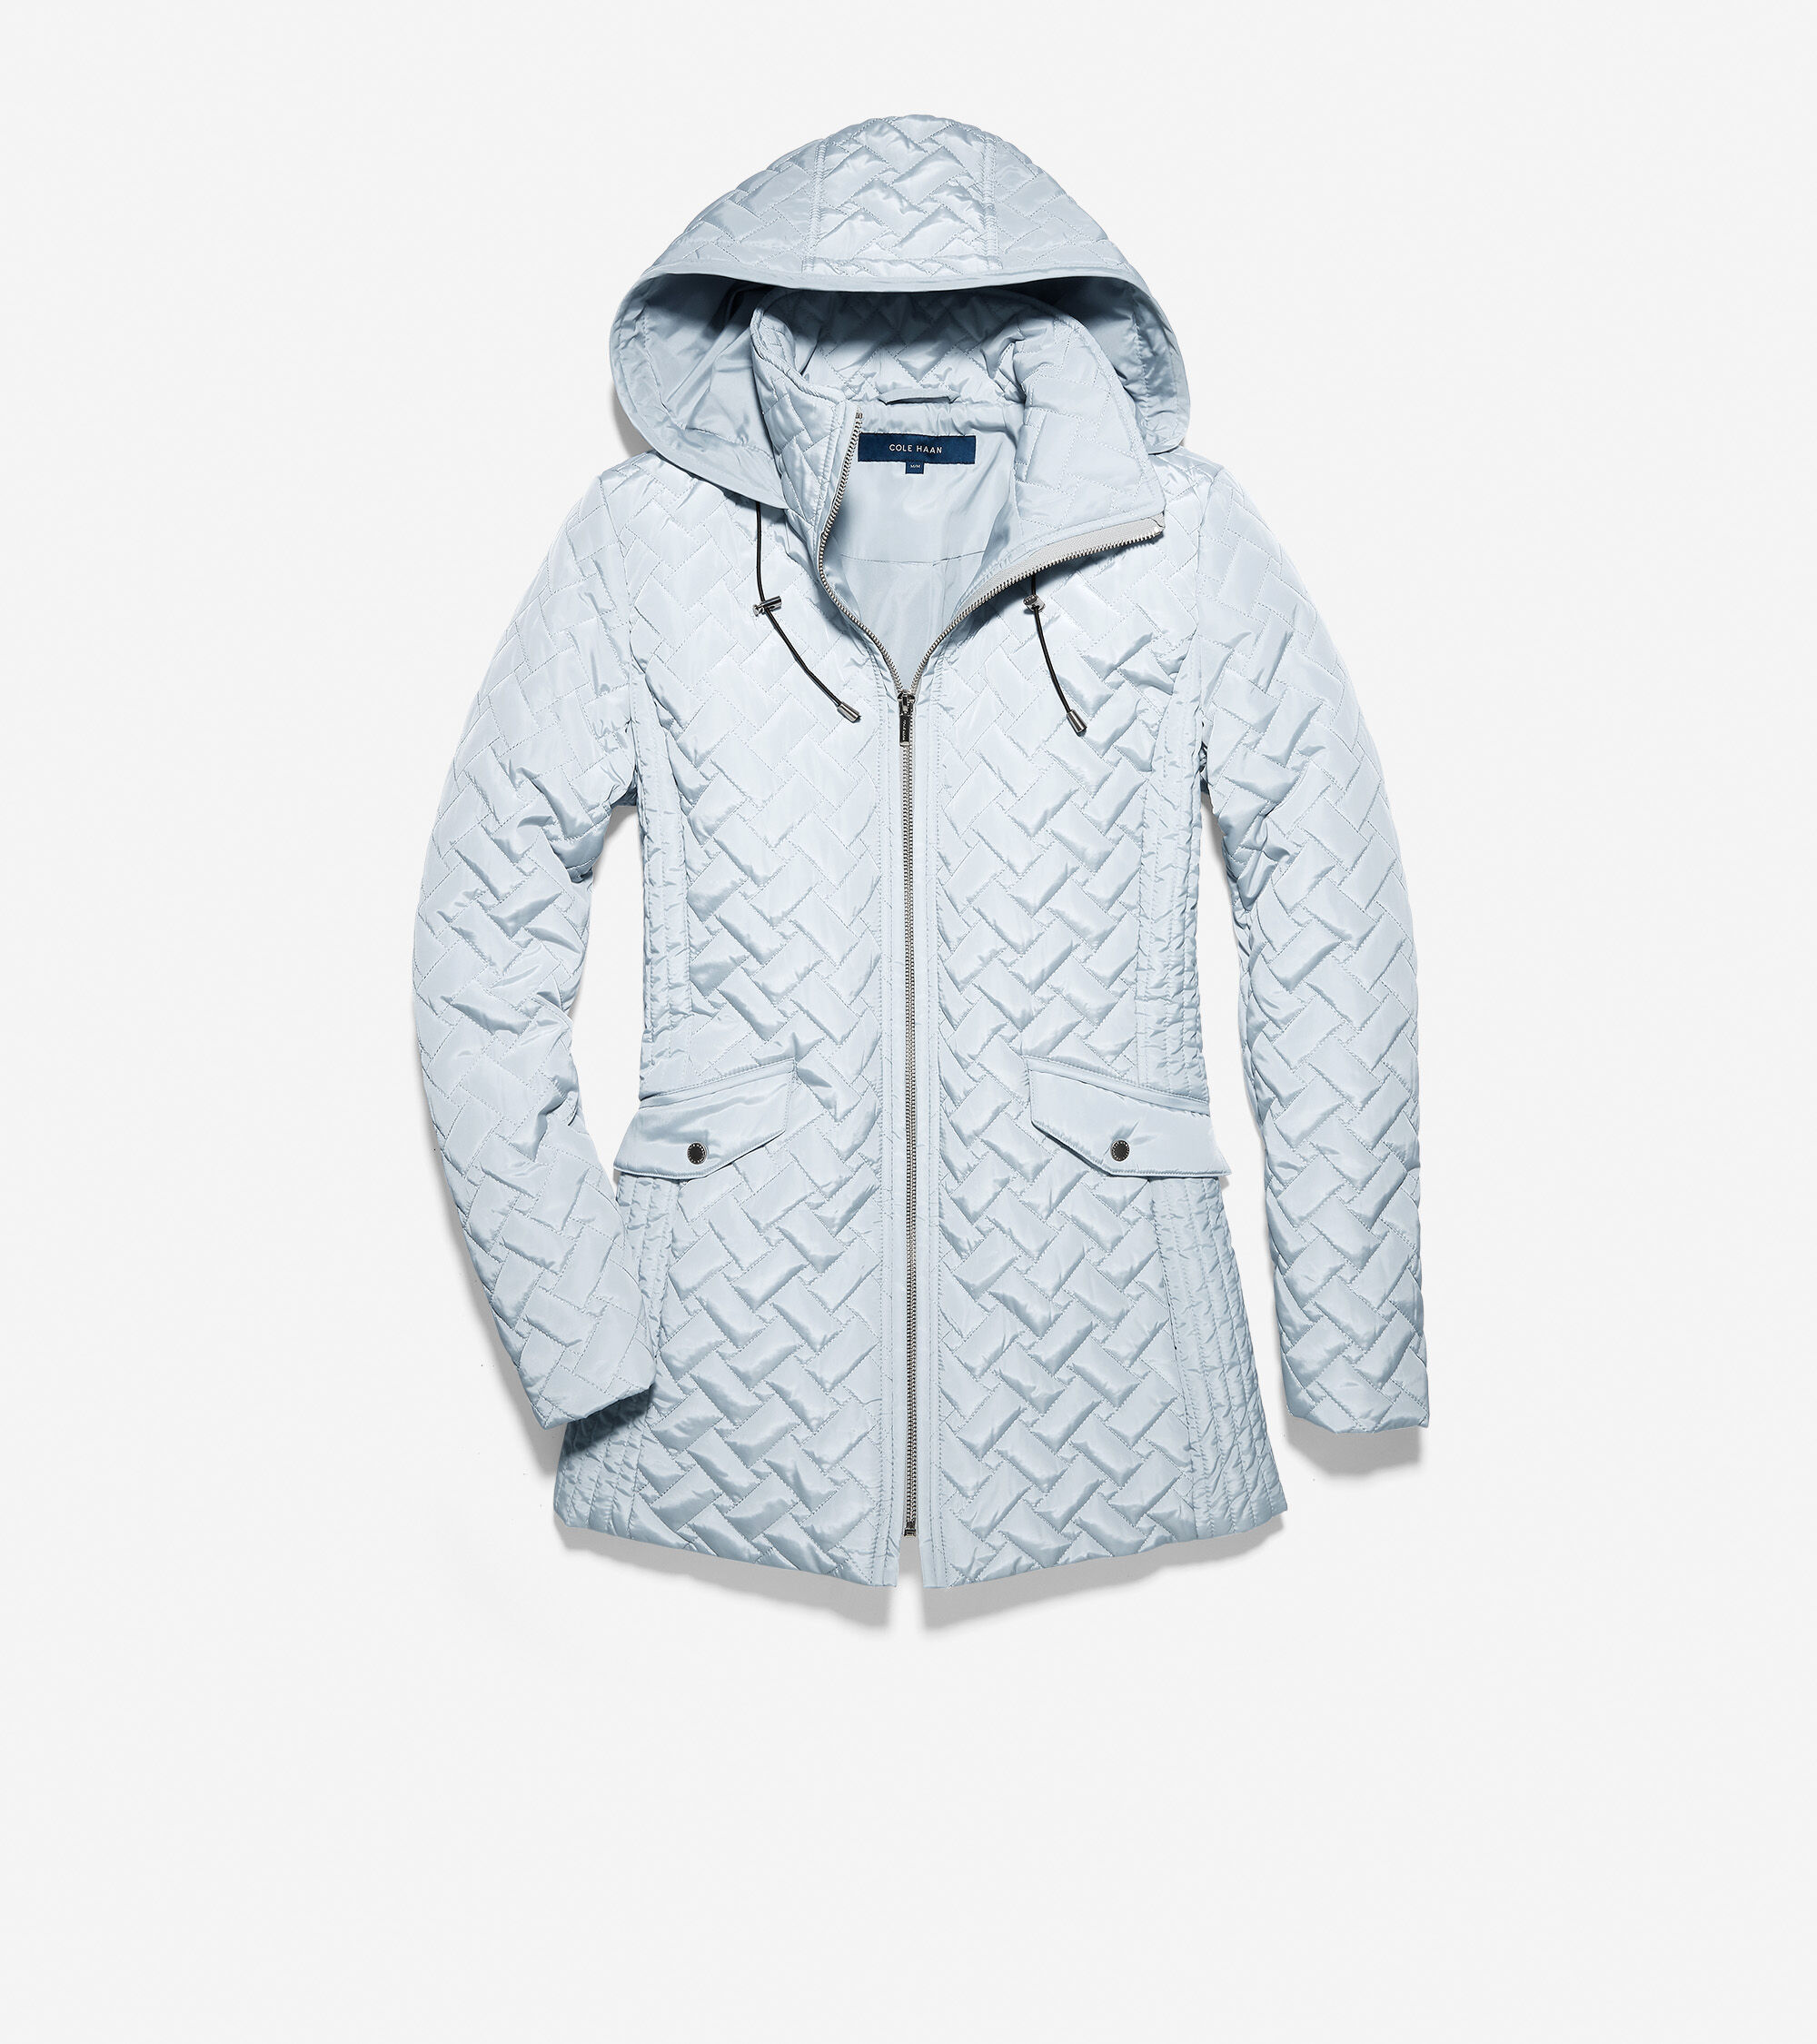 cole haan signature quilted short jacket